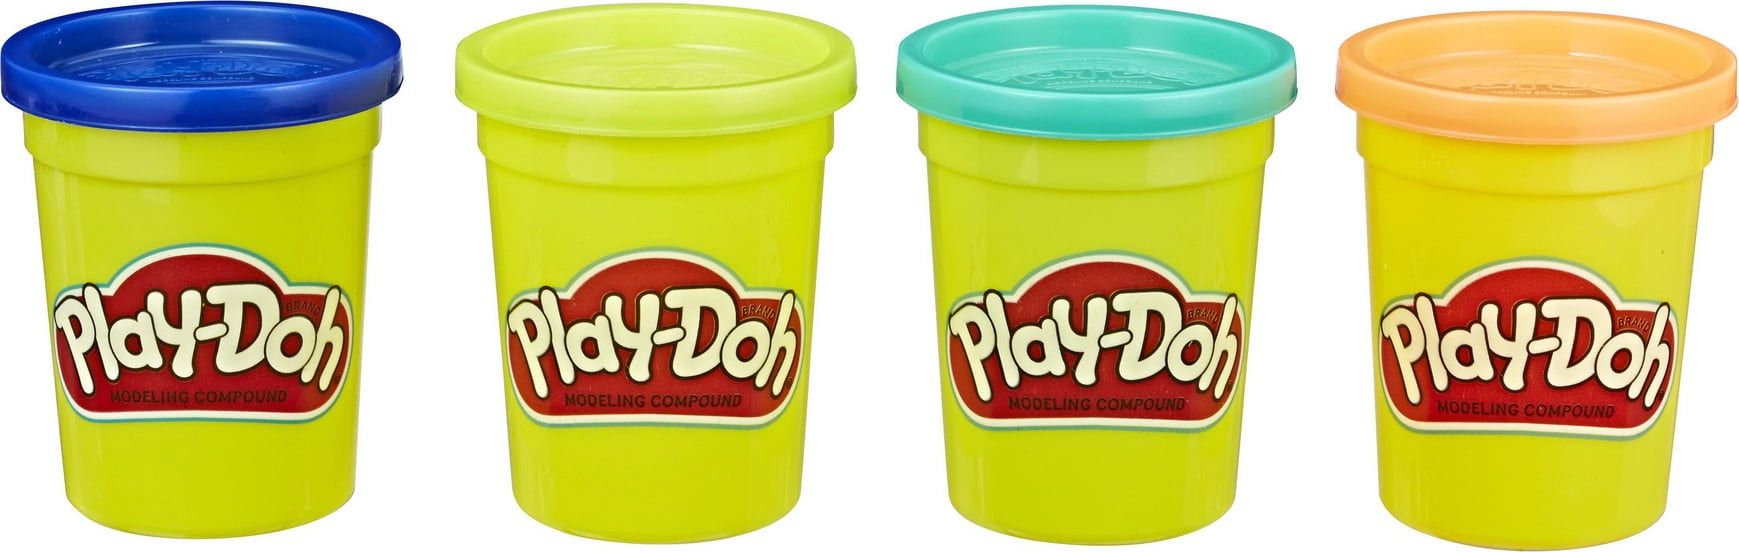 Play-doh 4pack Wild